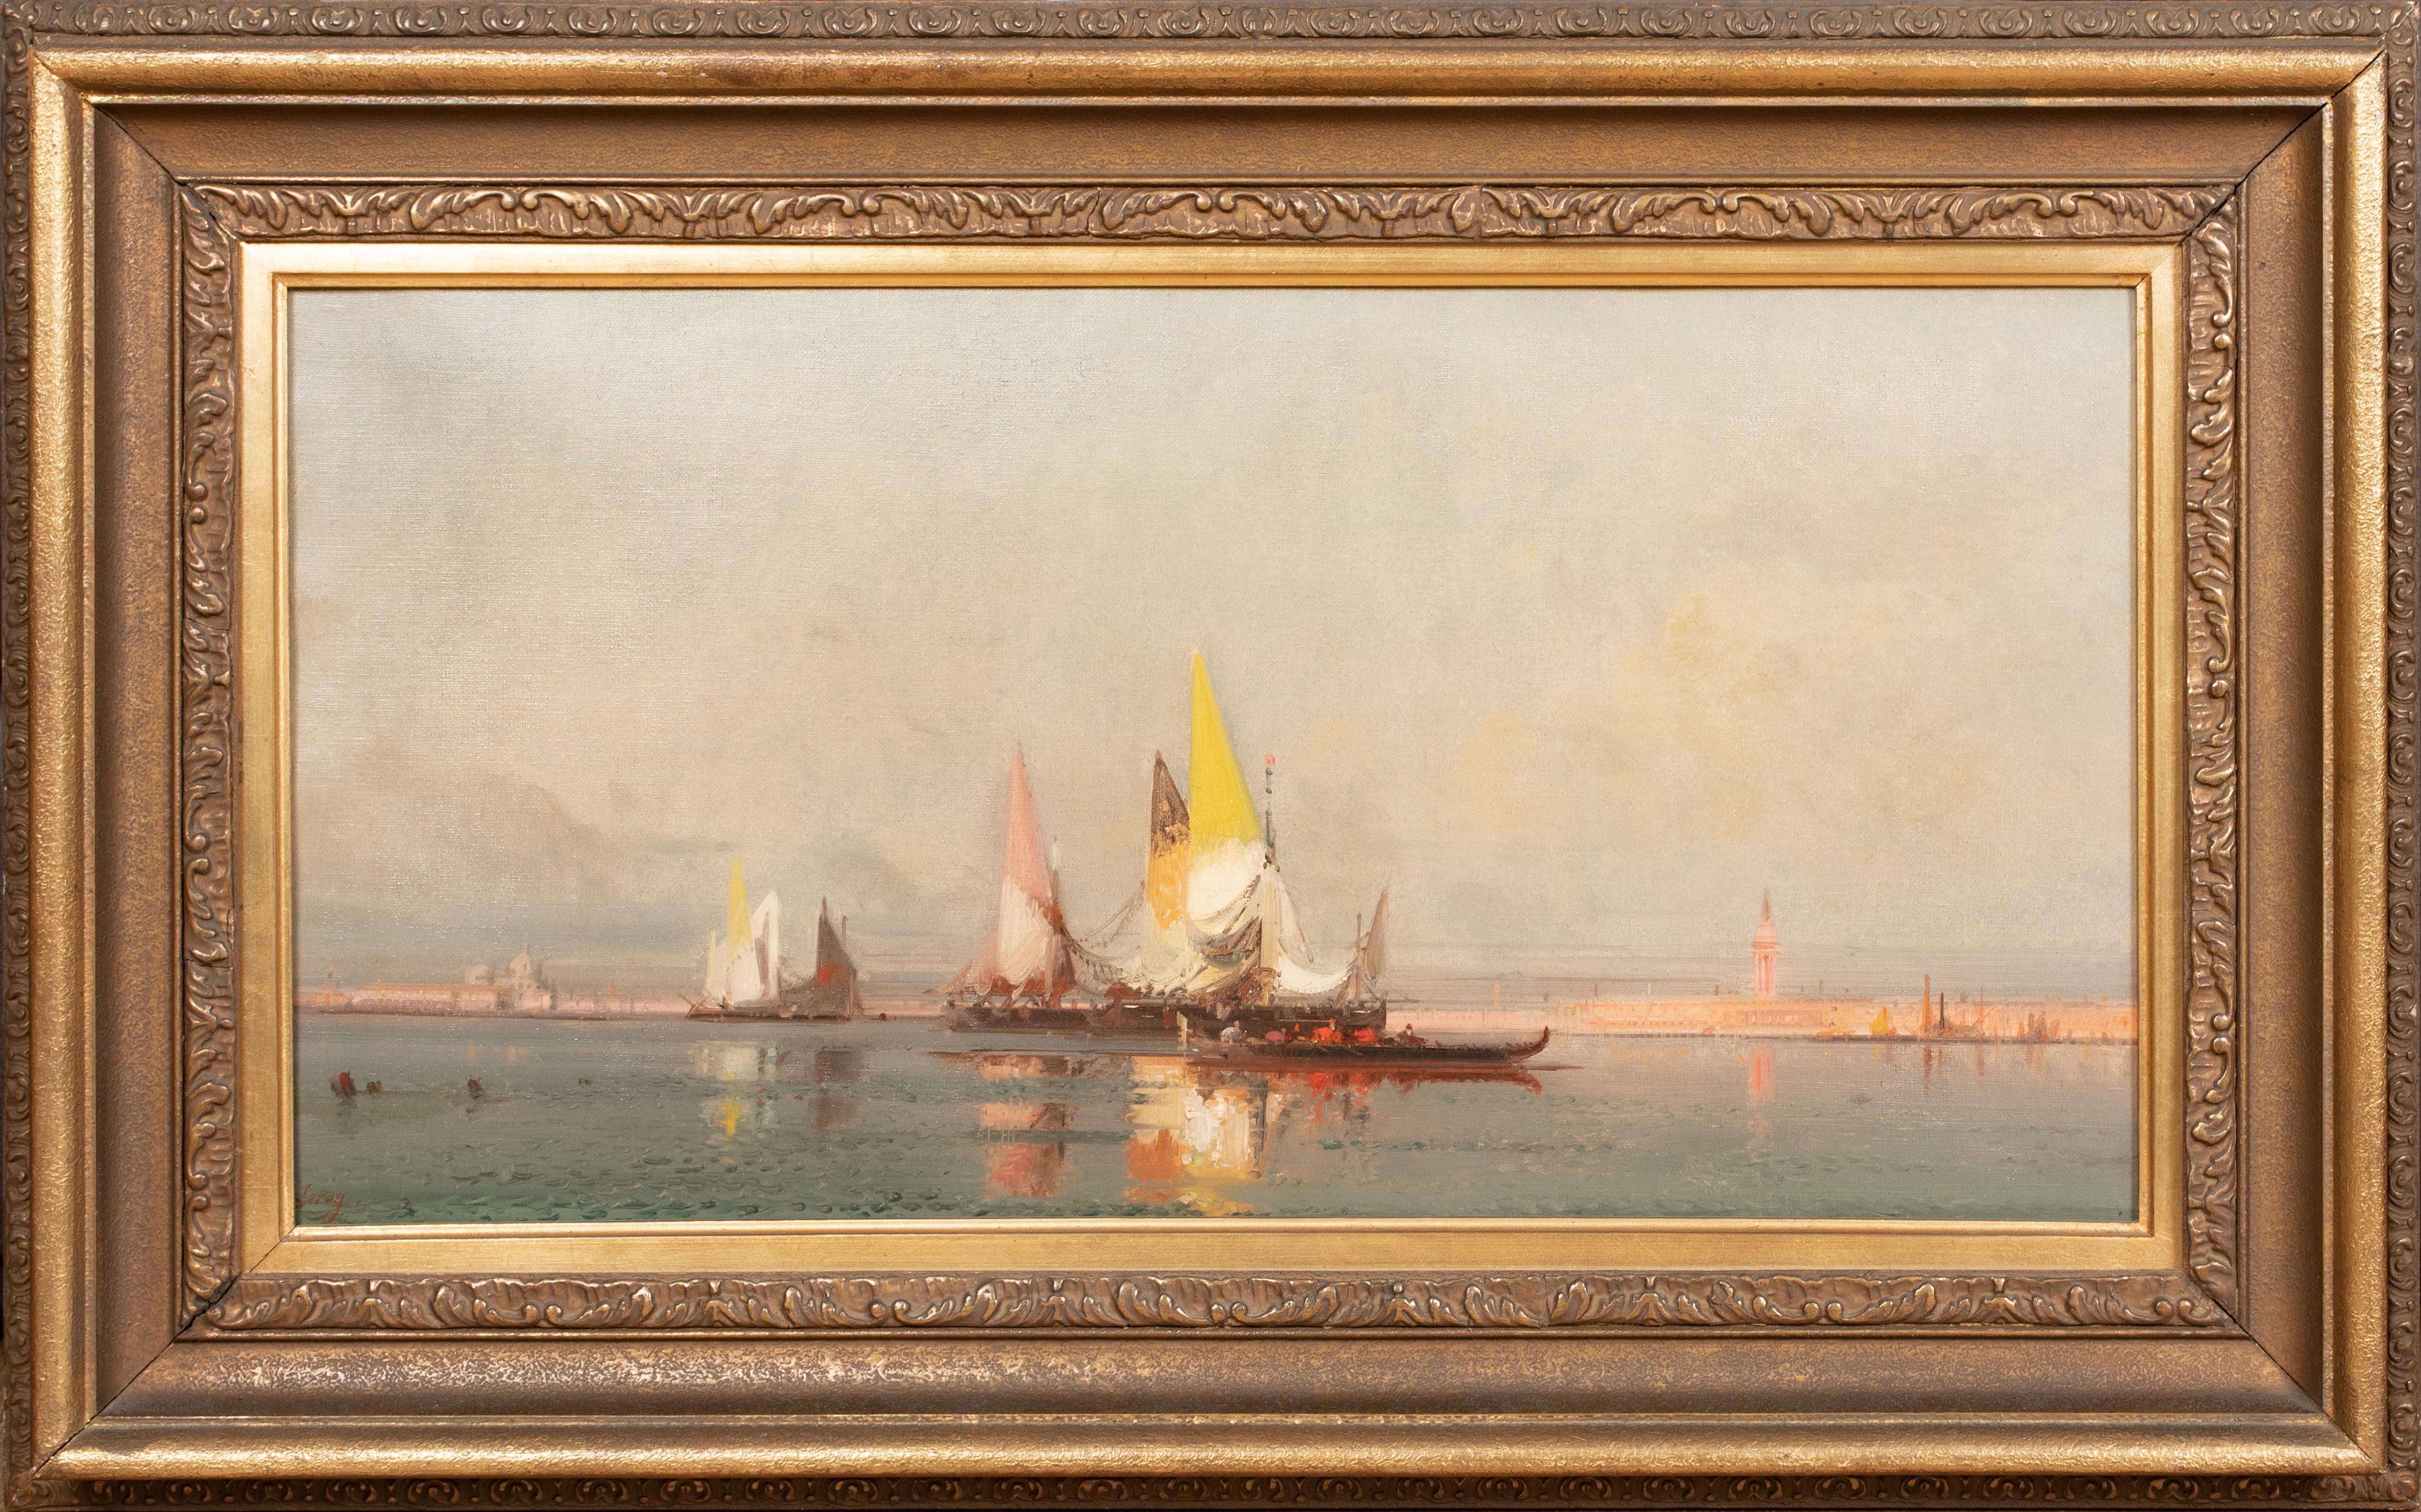 Unknown Portrait Painting - Ships Sailing In A Venice Lagon At Sunset 19th Century Etienne Leroy (1828-1876)